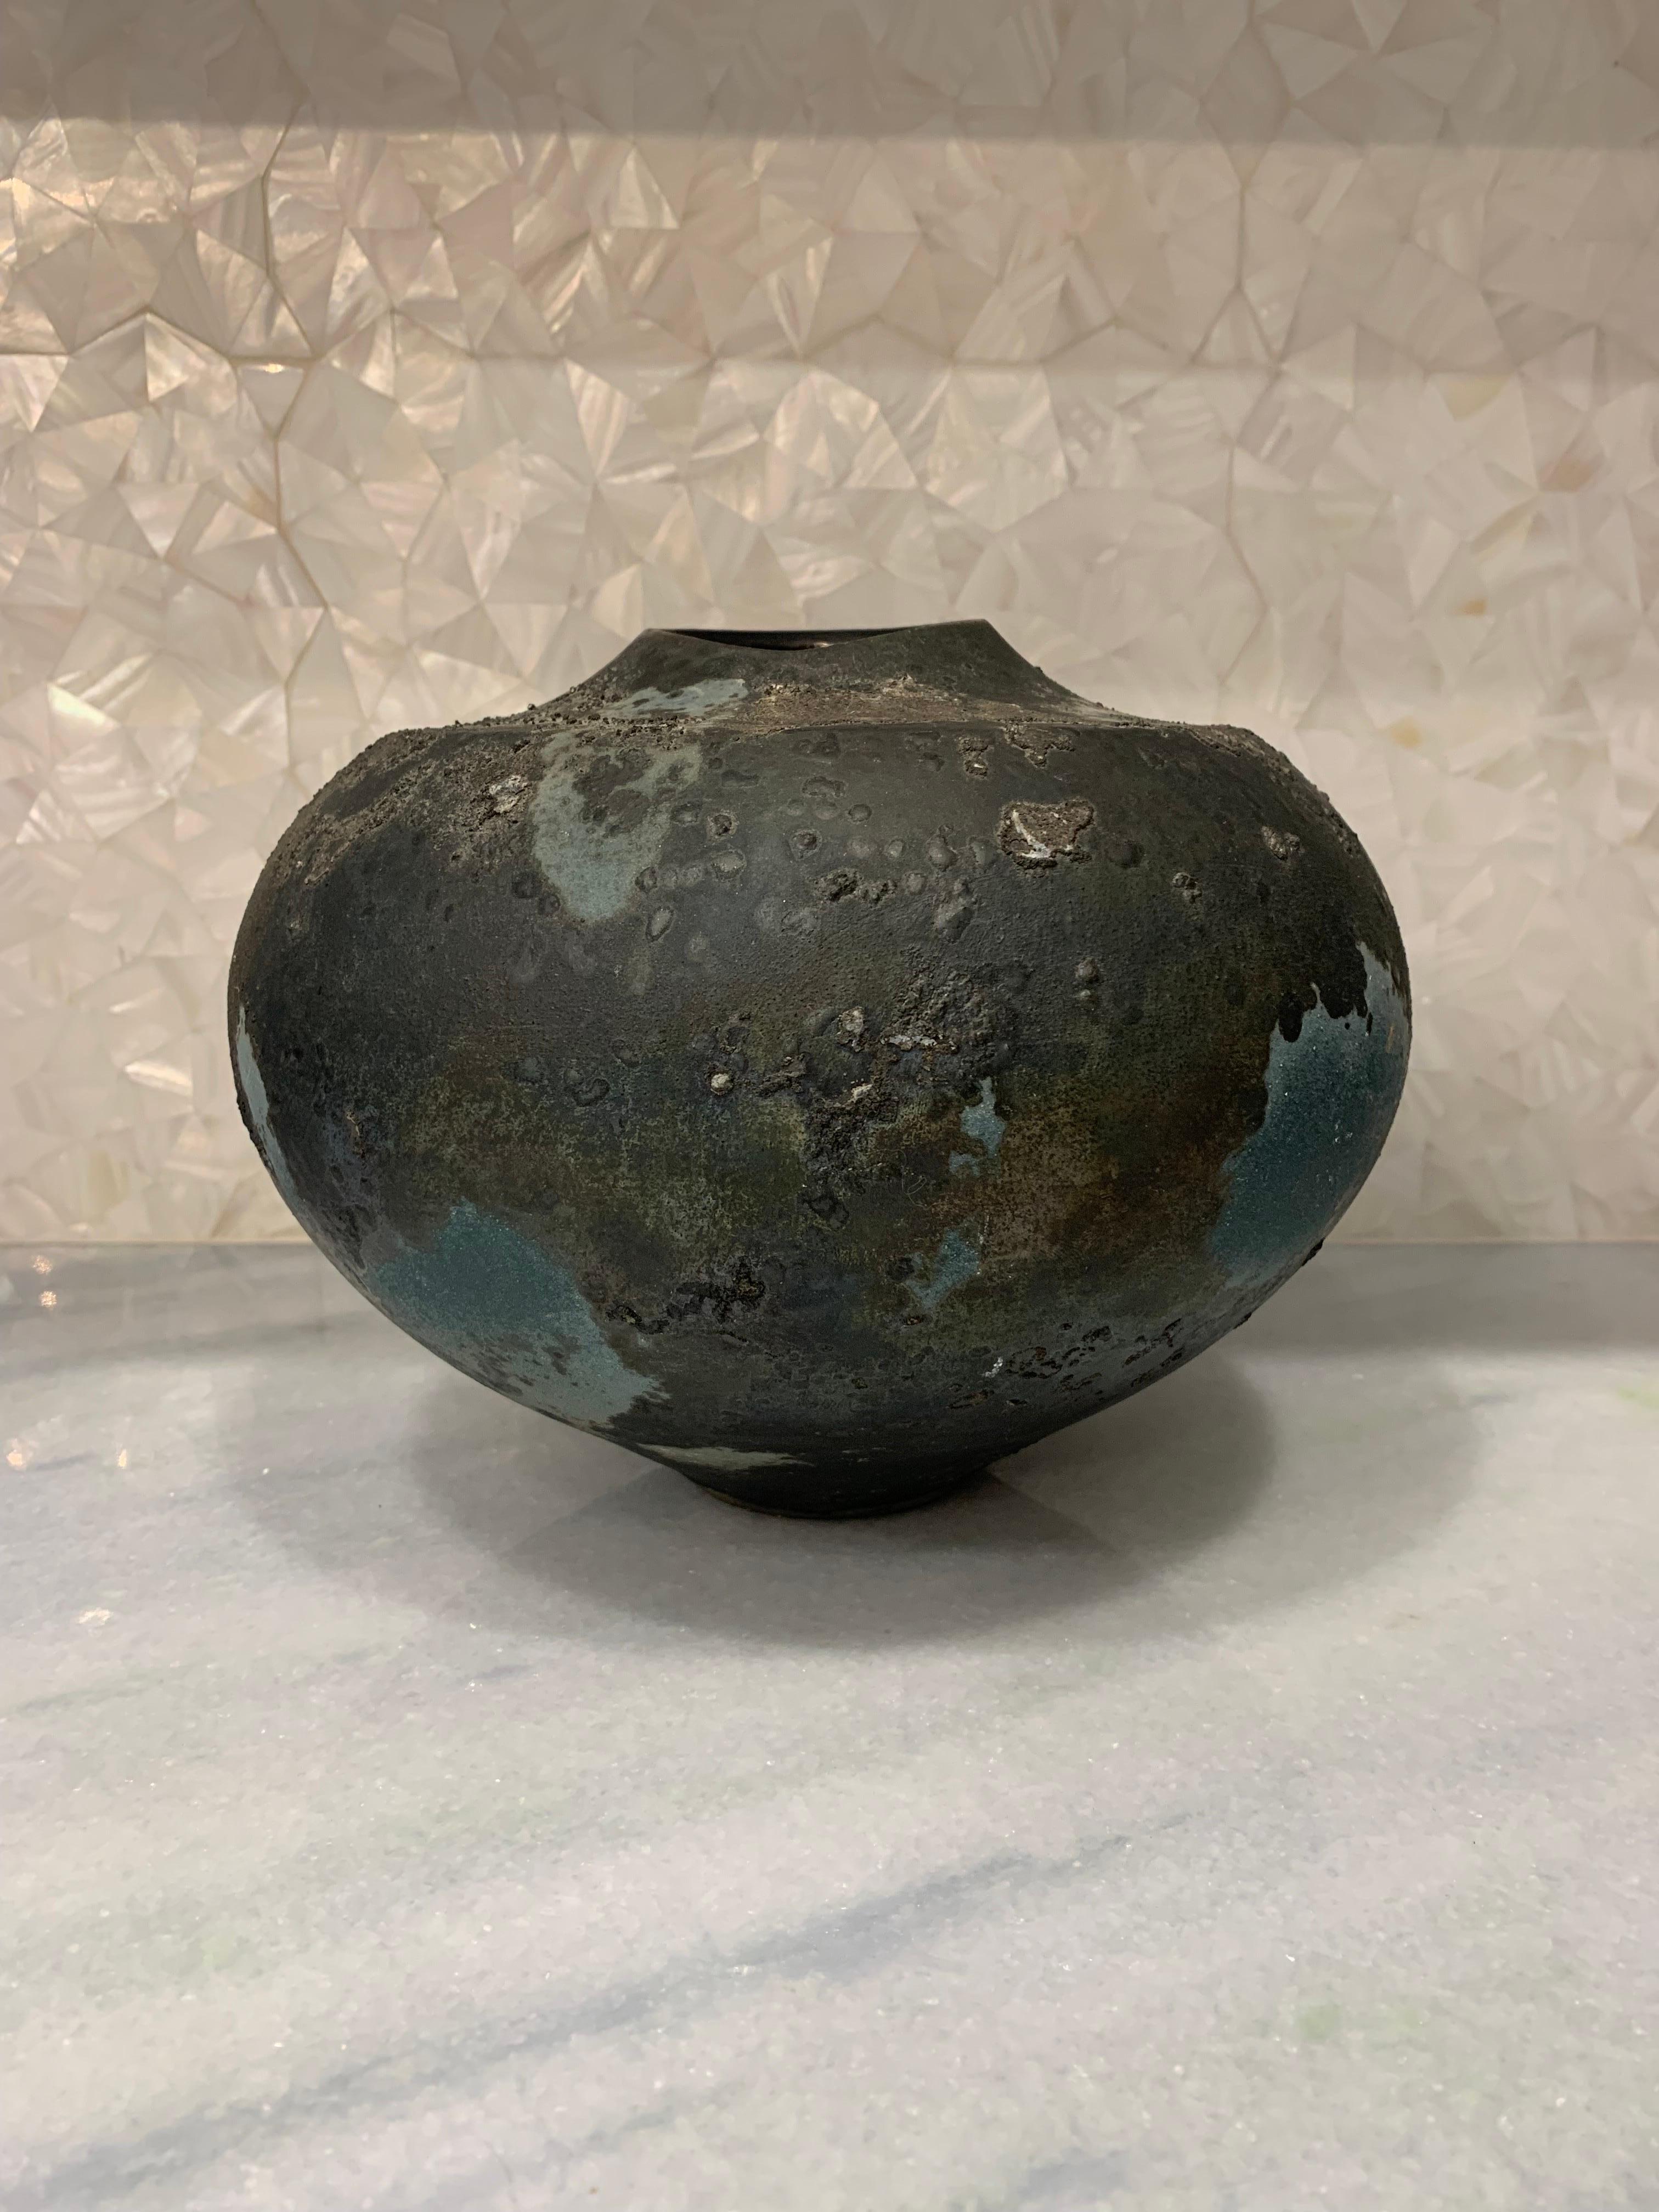 Large and beautiful multi colored glazed raku vase. Done in the traditional raku style of Tony Evans. Beautiful textured surface. Resembles a giant blueberry. Signed underneath Evans - 31. 

Measures; 9.5